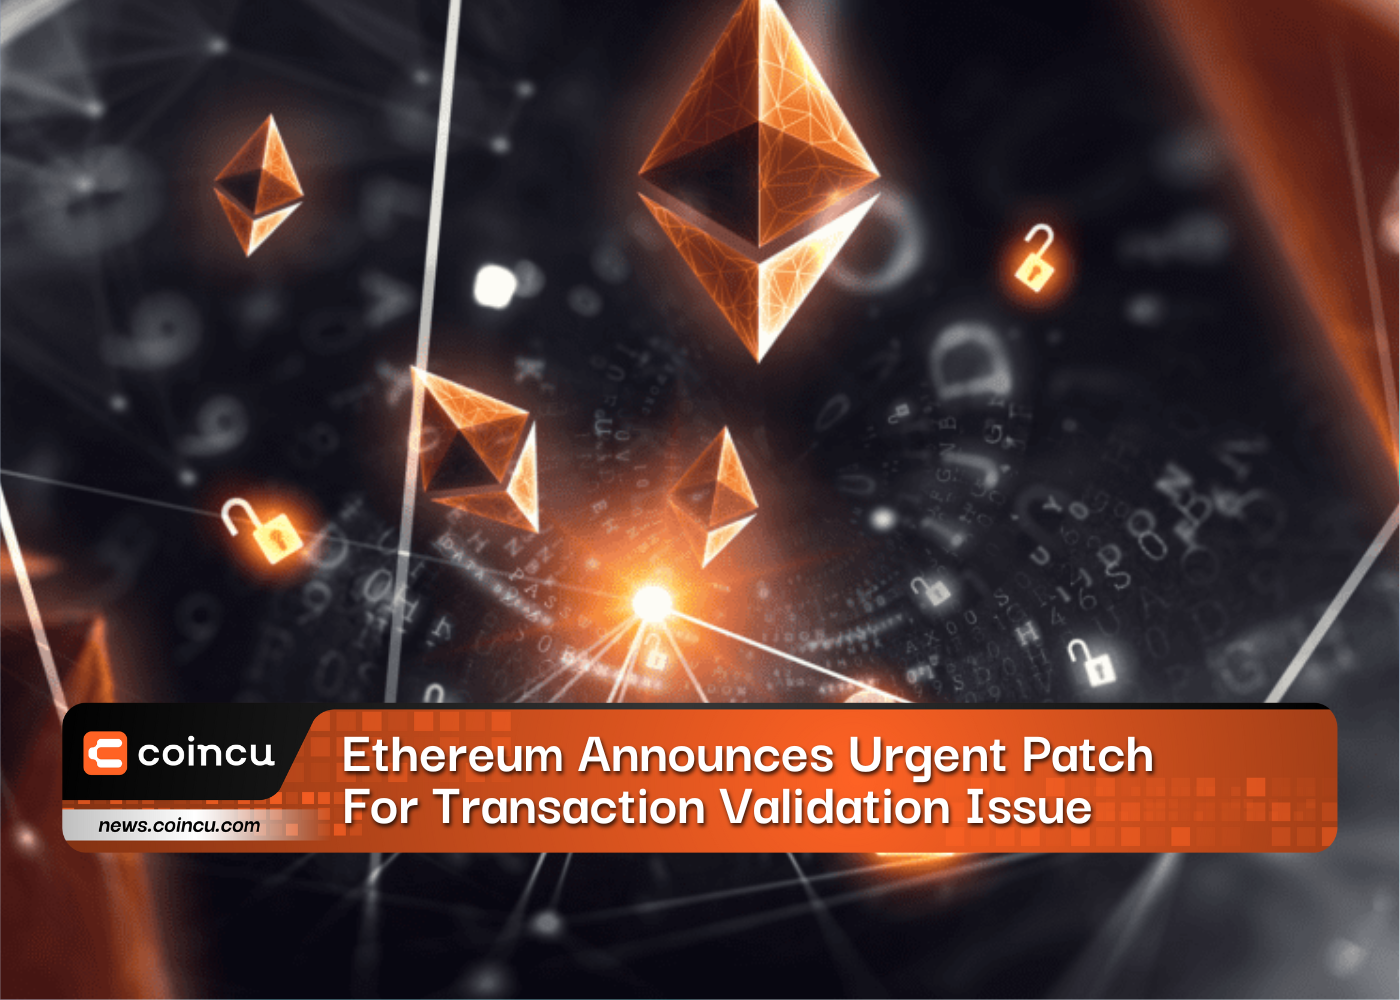 Ethereum Announces Urgent Patch For Transaction Validation Issue